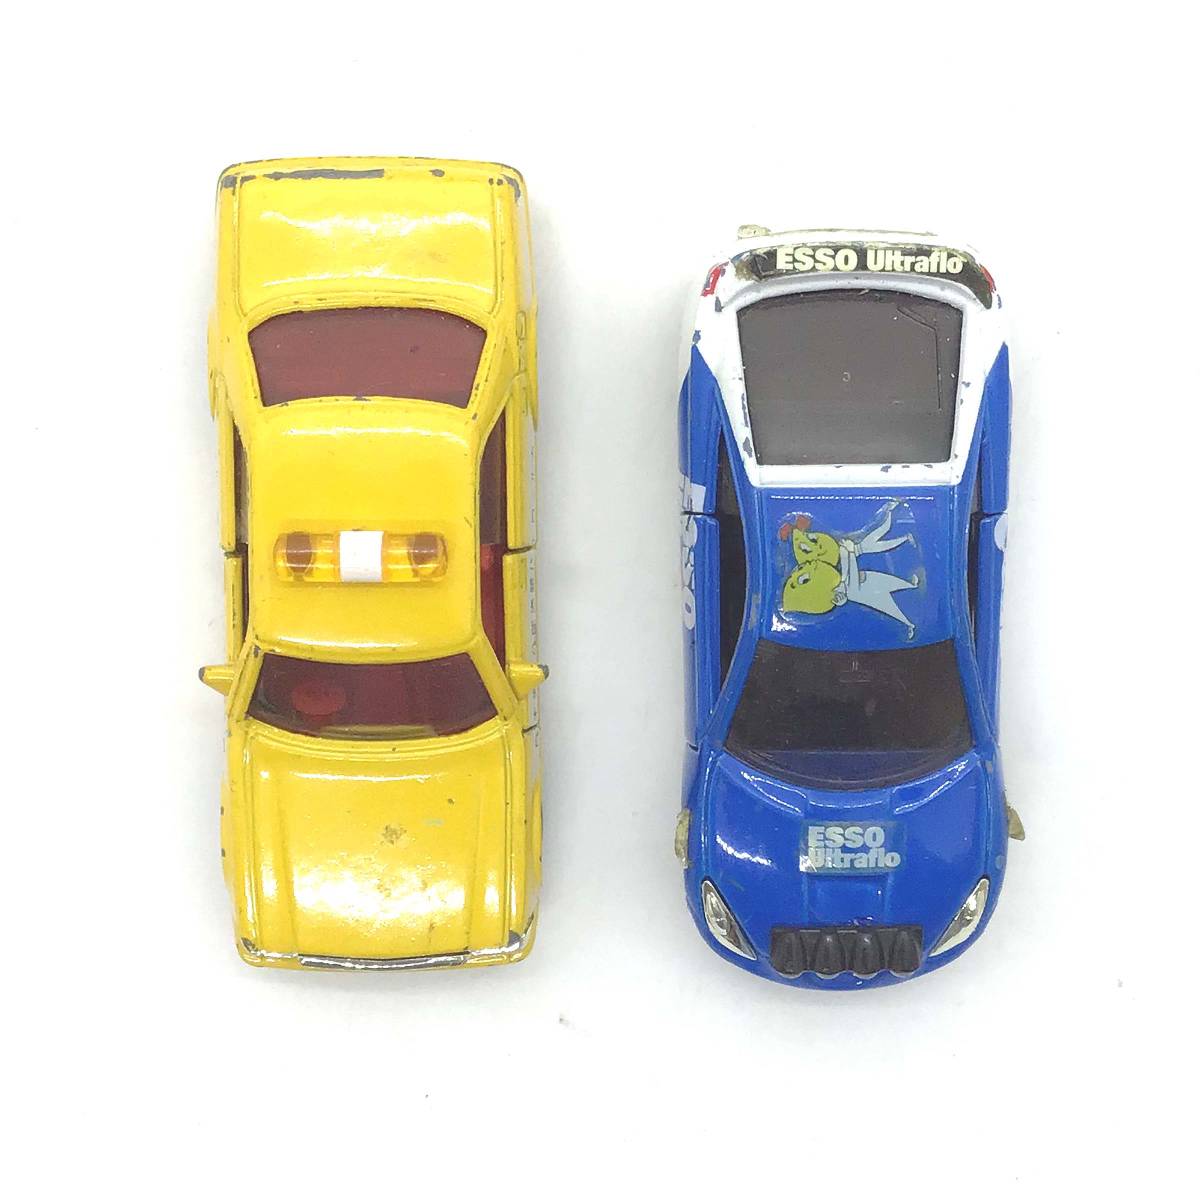 CL【tomica】TOYOTA CROWN No.55 CELICA No.96 2台セット トミカ コレクション ミニカー おもちゃ 玩具 トヨタ_画像8